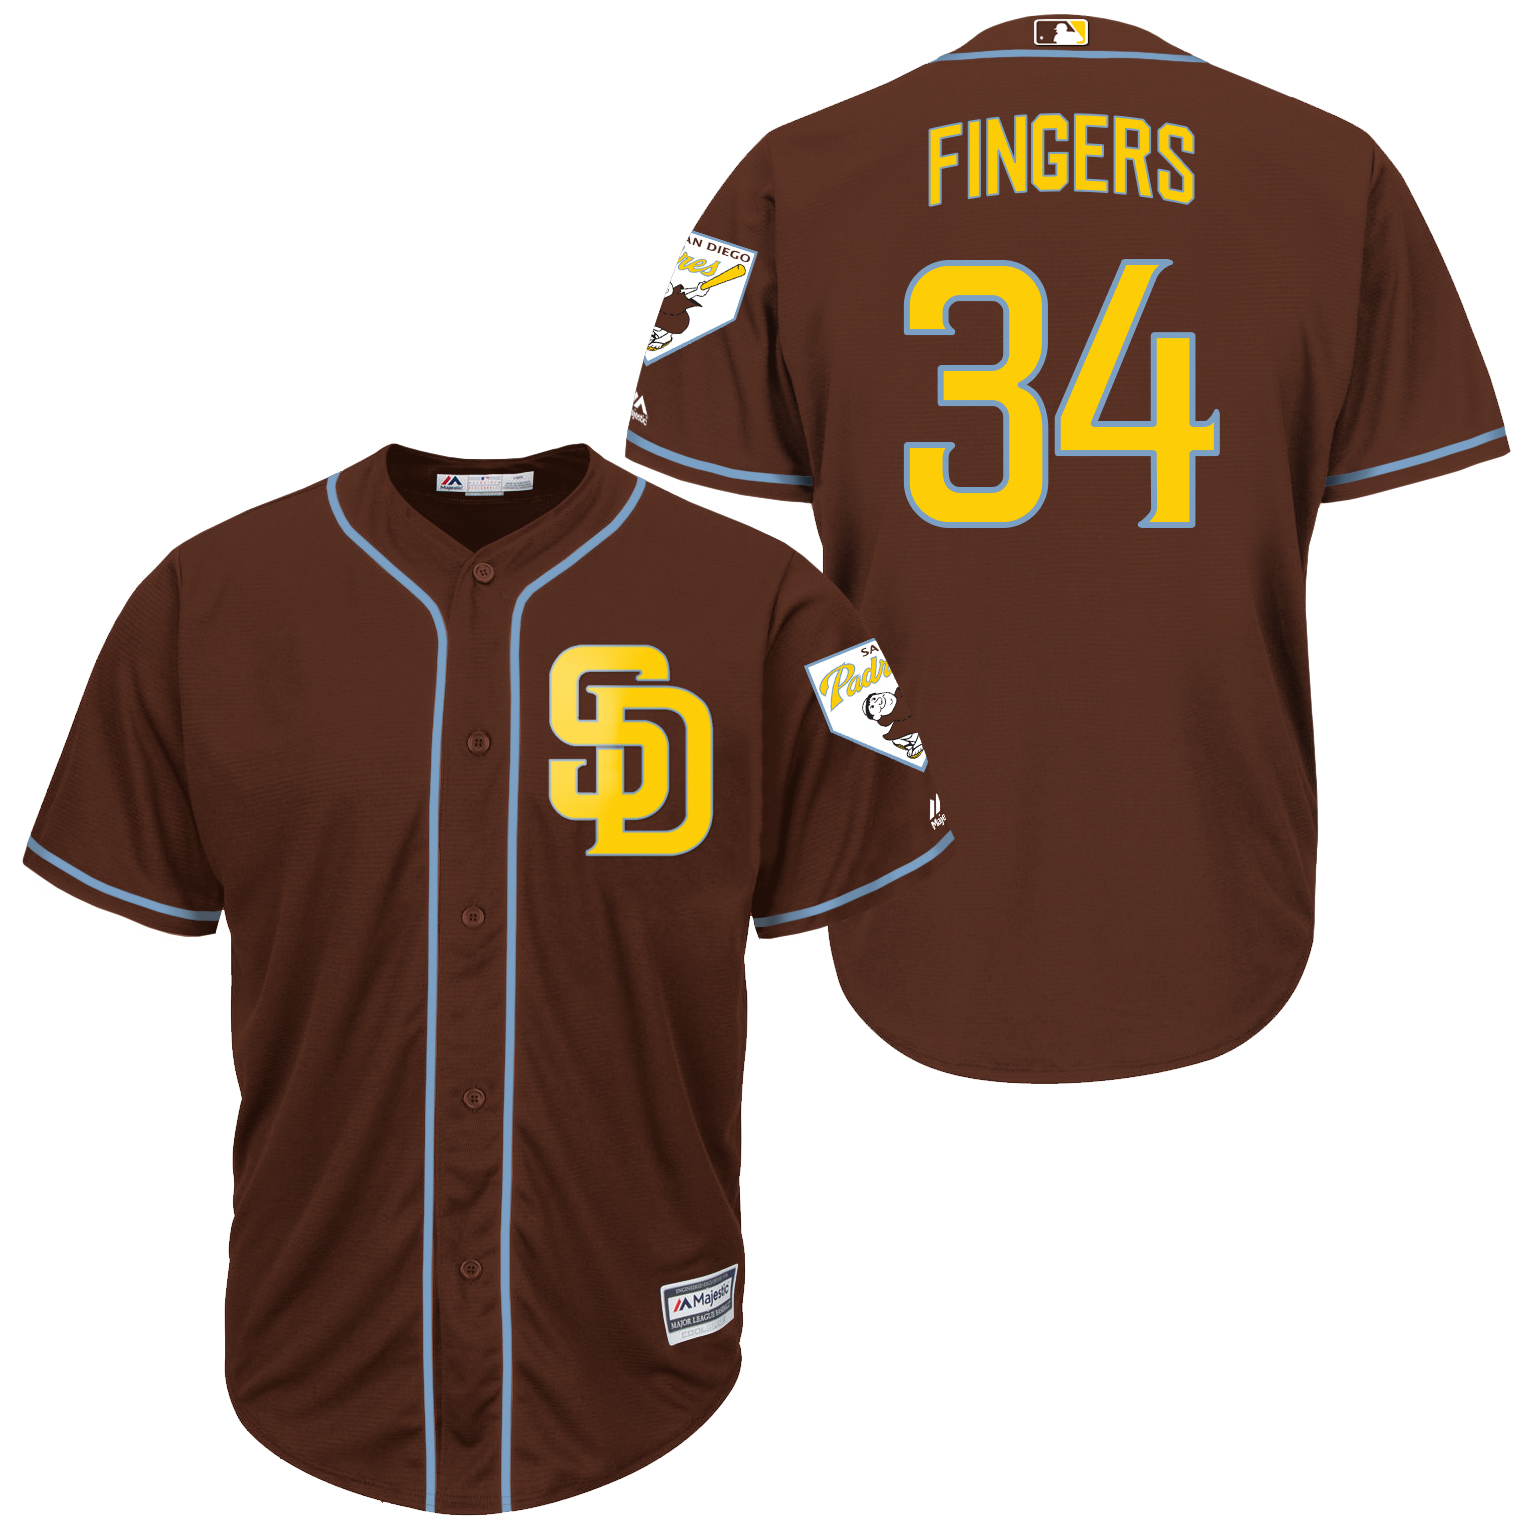 Padres 34 Rollie Fingers Brown New Cool Base Jersey